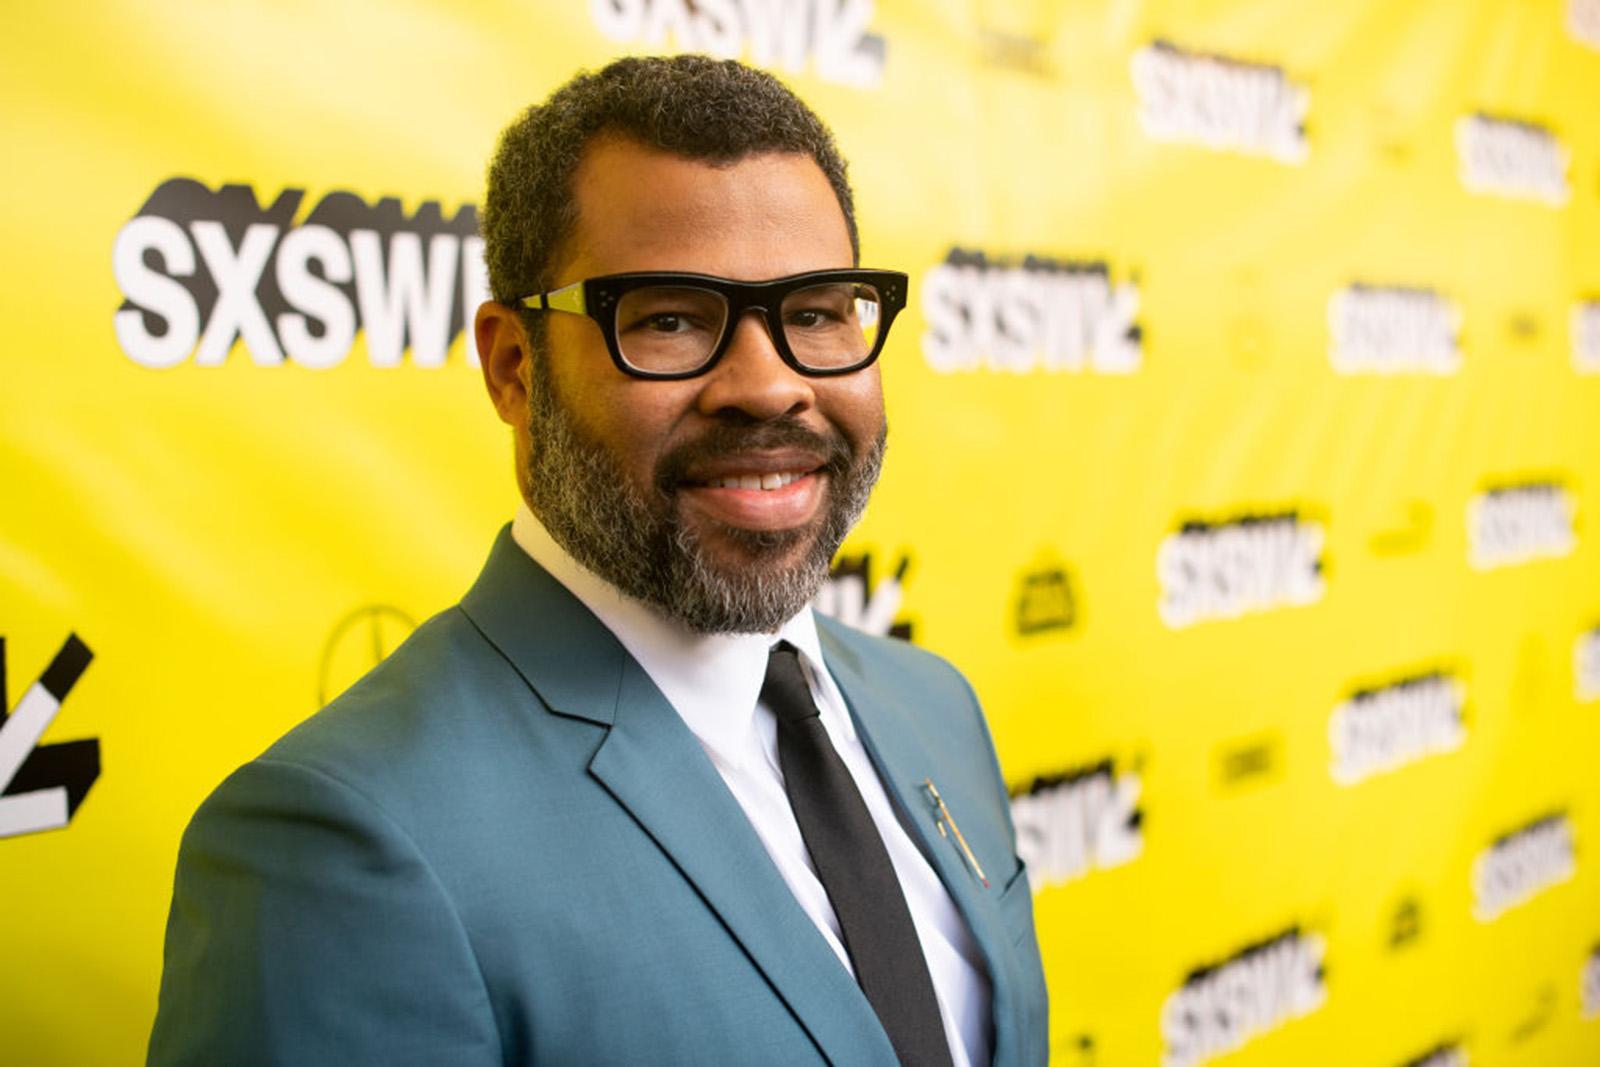 Jordan Peele attends the Us Premiere 2019 SXSW Conference and Festivals at Paramount Theater on March 08, 2019 in Austin, Texas. (Matt Winkelmeyer/Getty Images for SXSW/TNS)